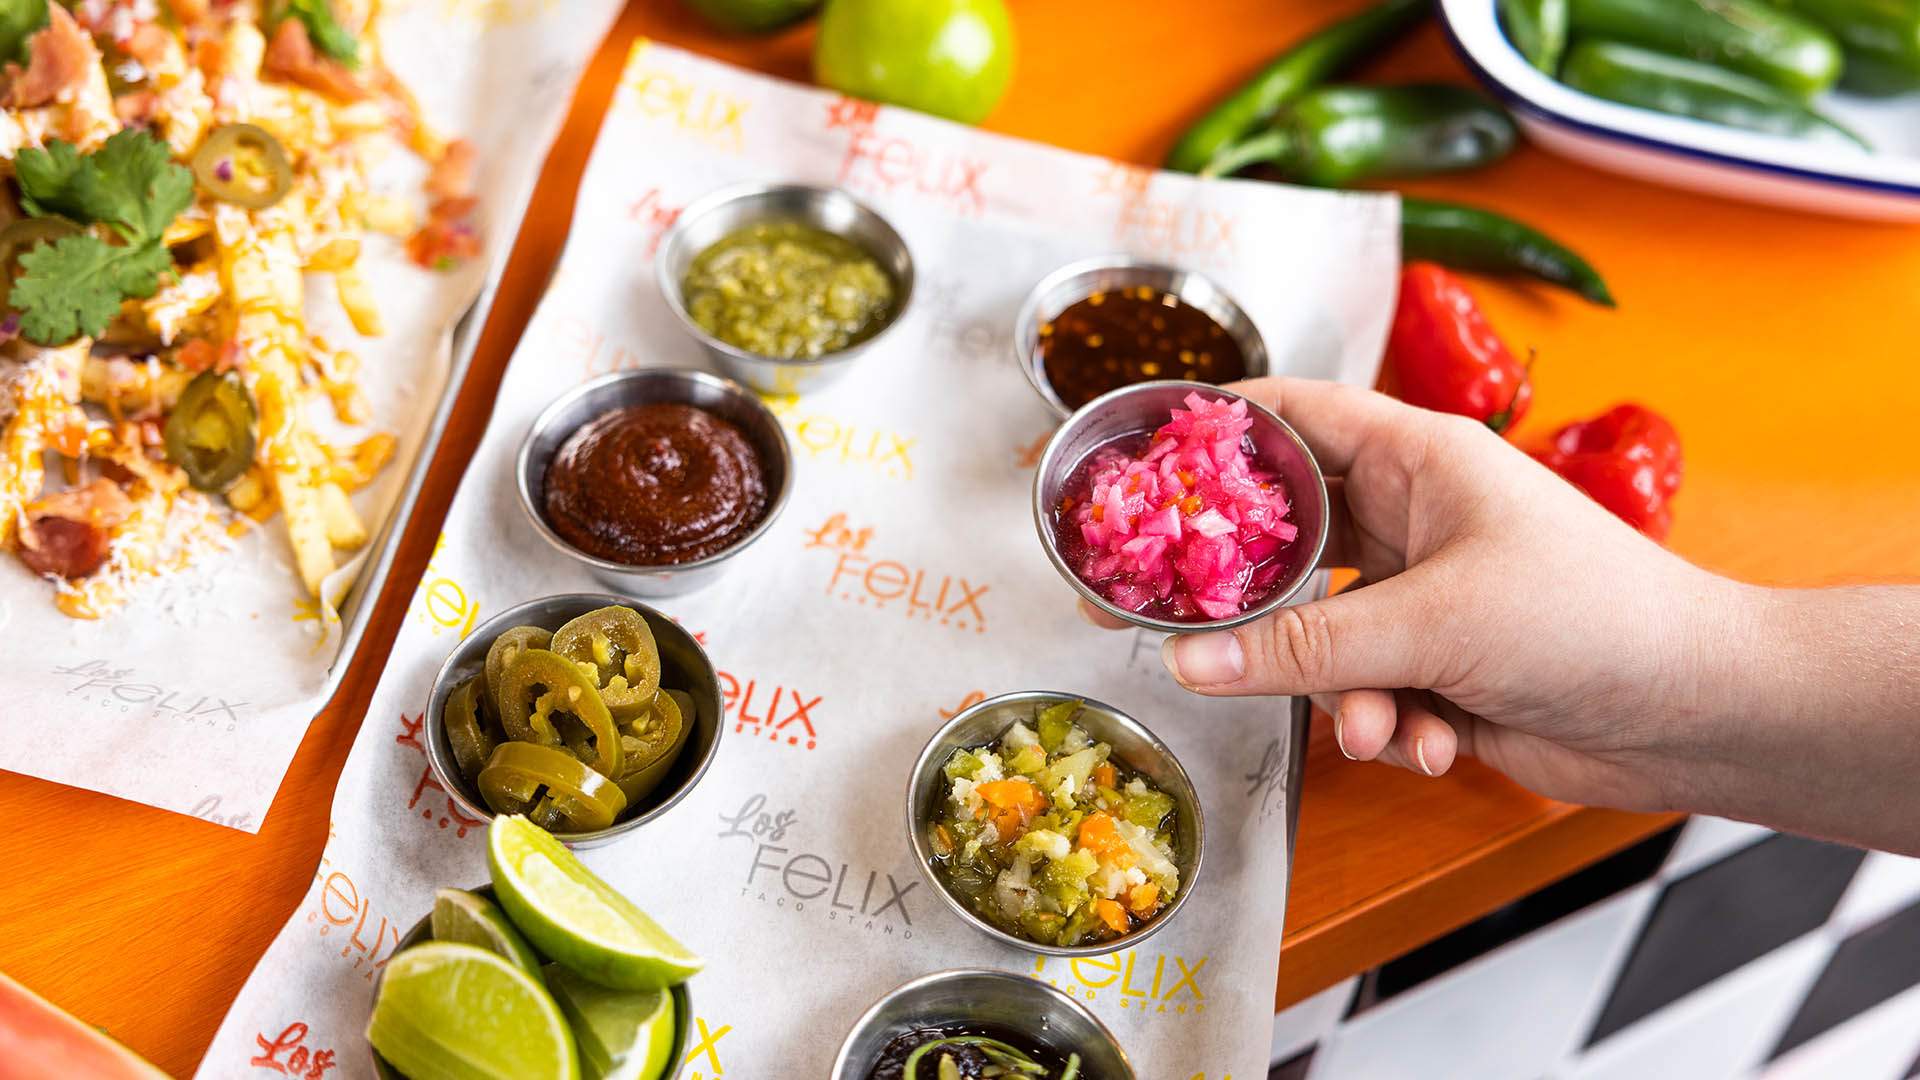 Los Felix Is Woolloongabba's New Hole-in-the-Wall Taqueria Serving Southern California-Style Mexican Bites